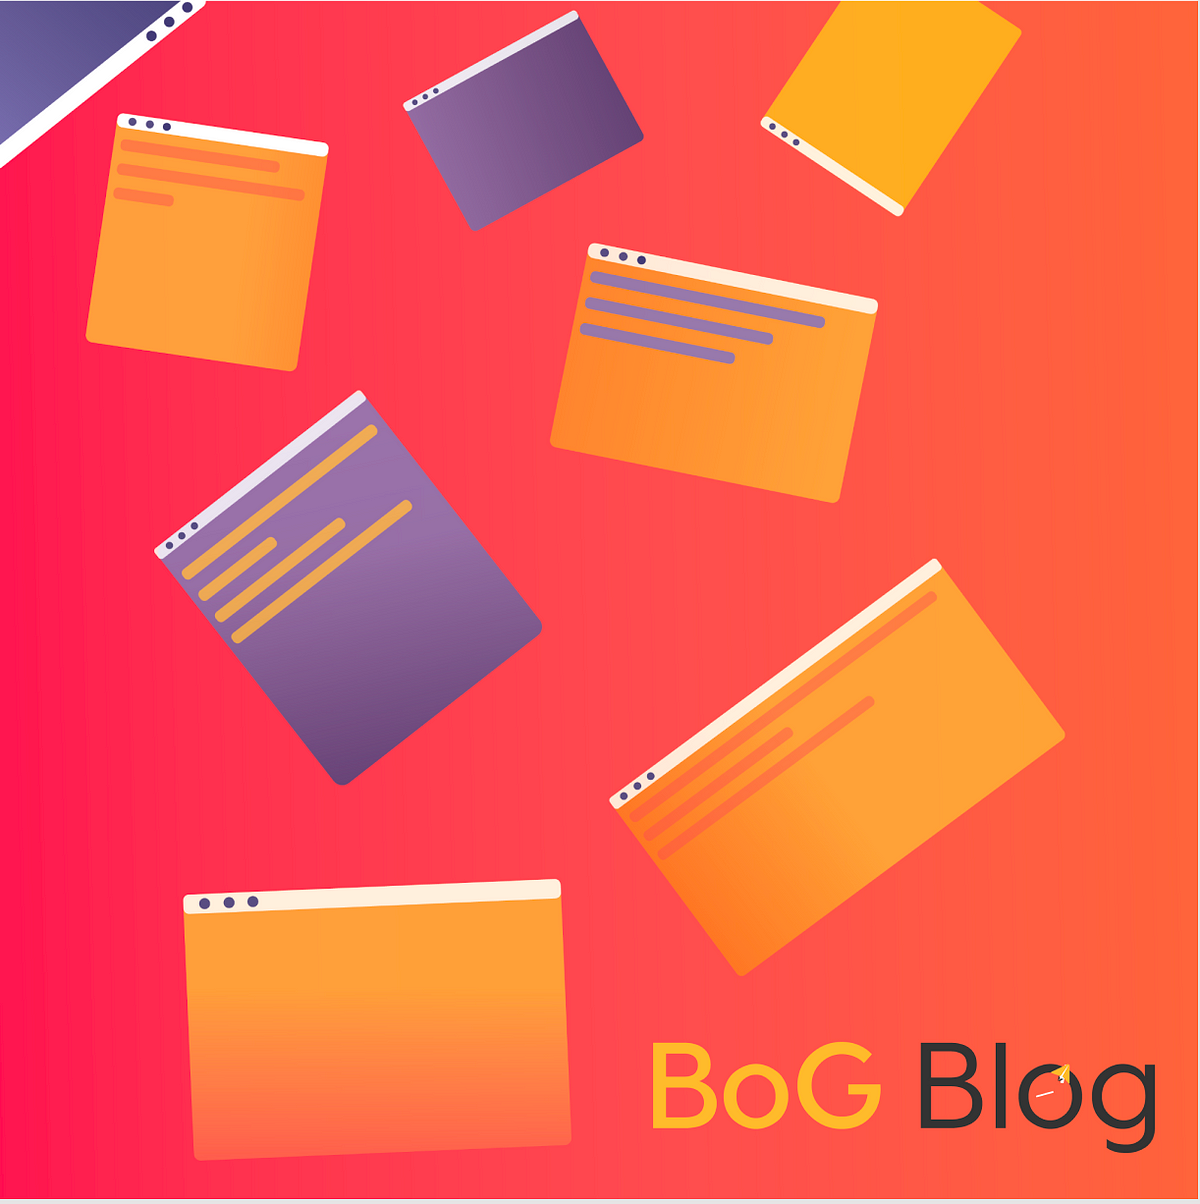 The BoG Blog. Welcome to the Launch of BoG Blog! | by Sneha Kad | Bits of  Good | Medium